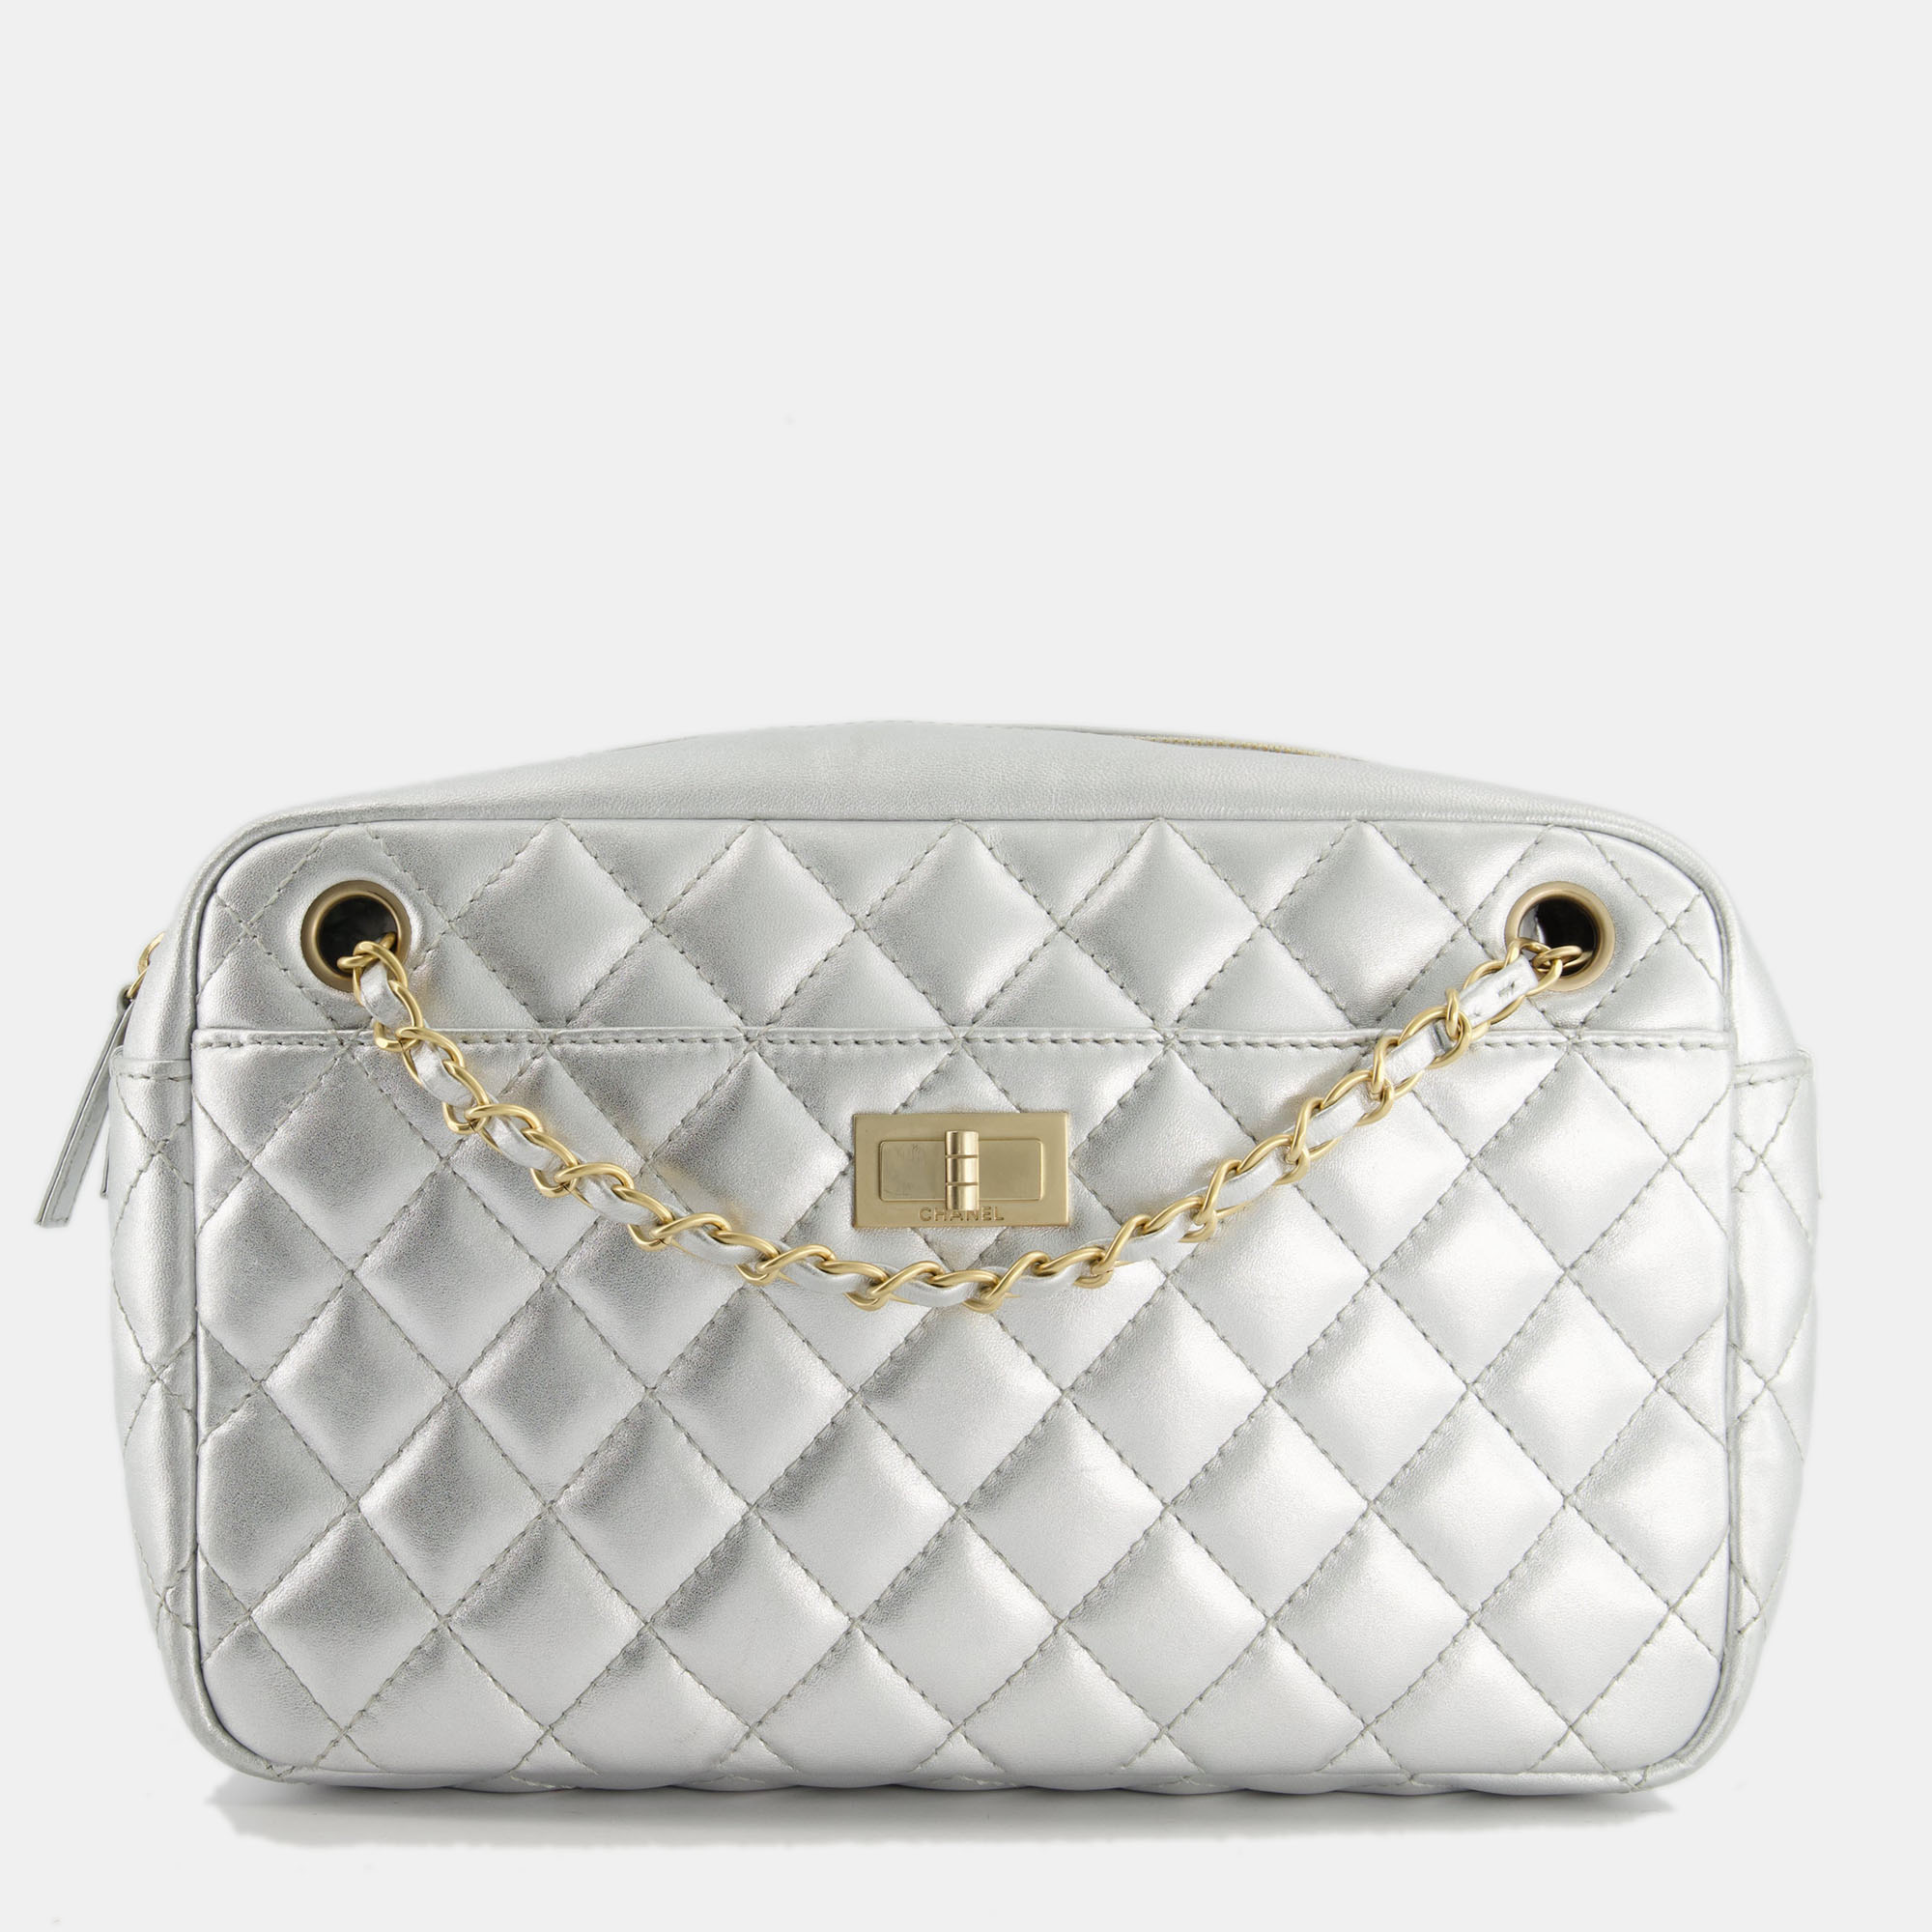 

Chanel Metallic Silver Camera Bag in Lambskin With Brushed Gold Hardware